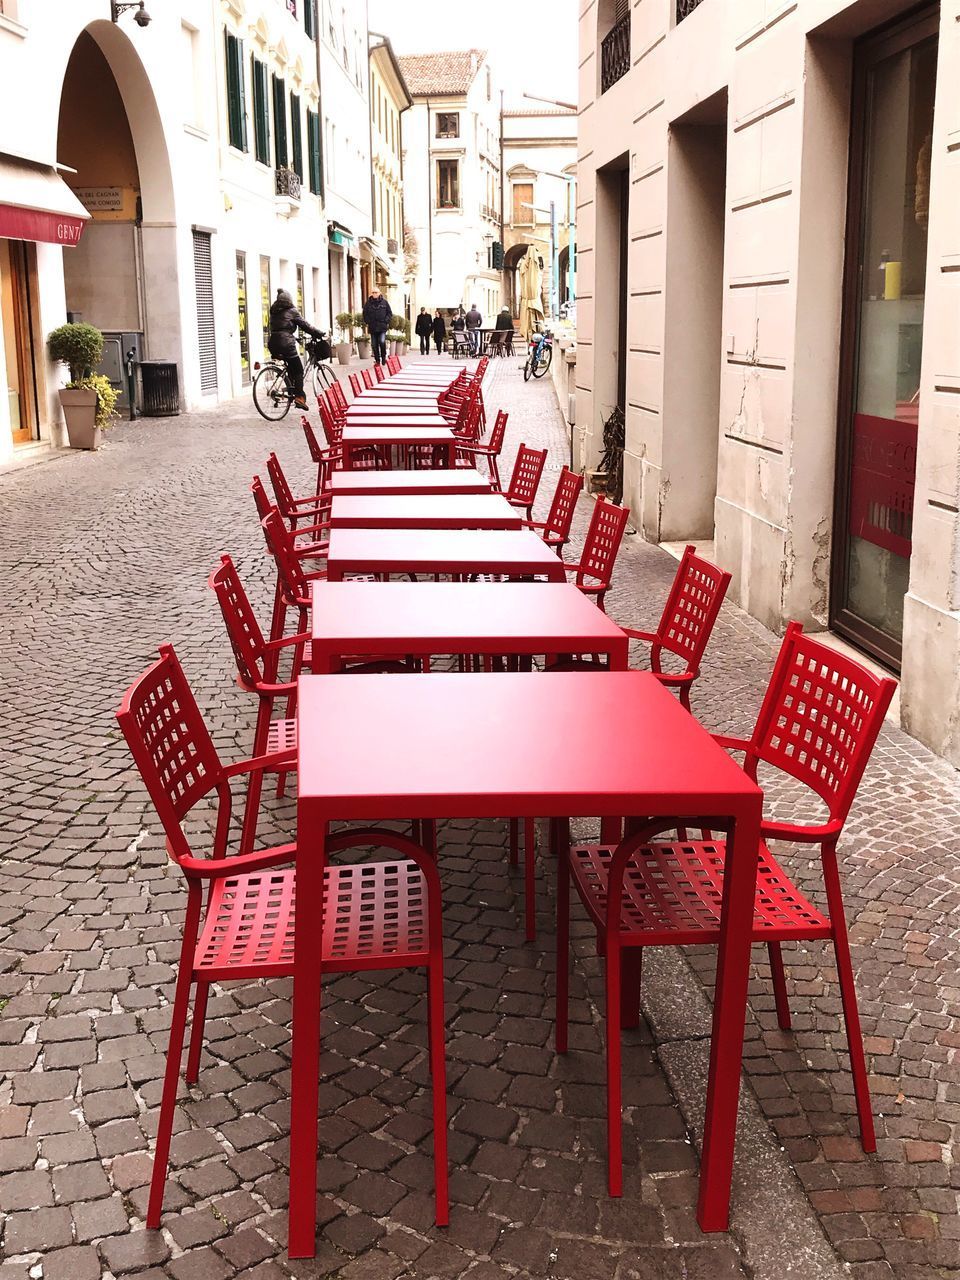 EMPTY CHAIRS AND TABLES ON STREET IN CITY